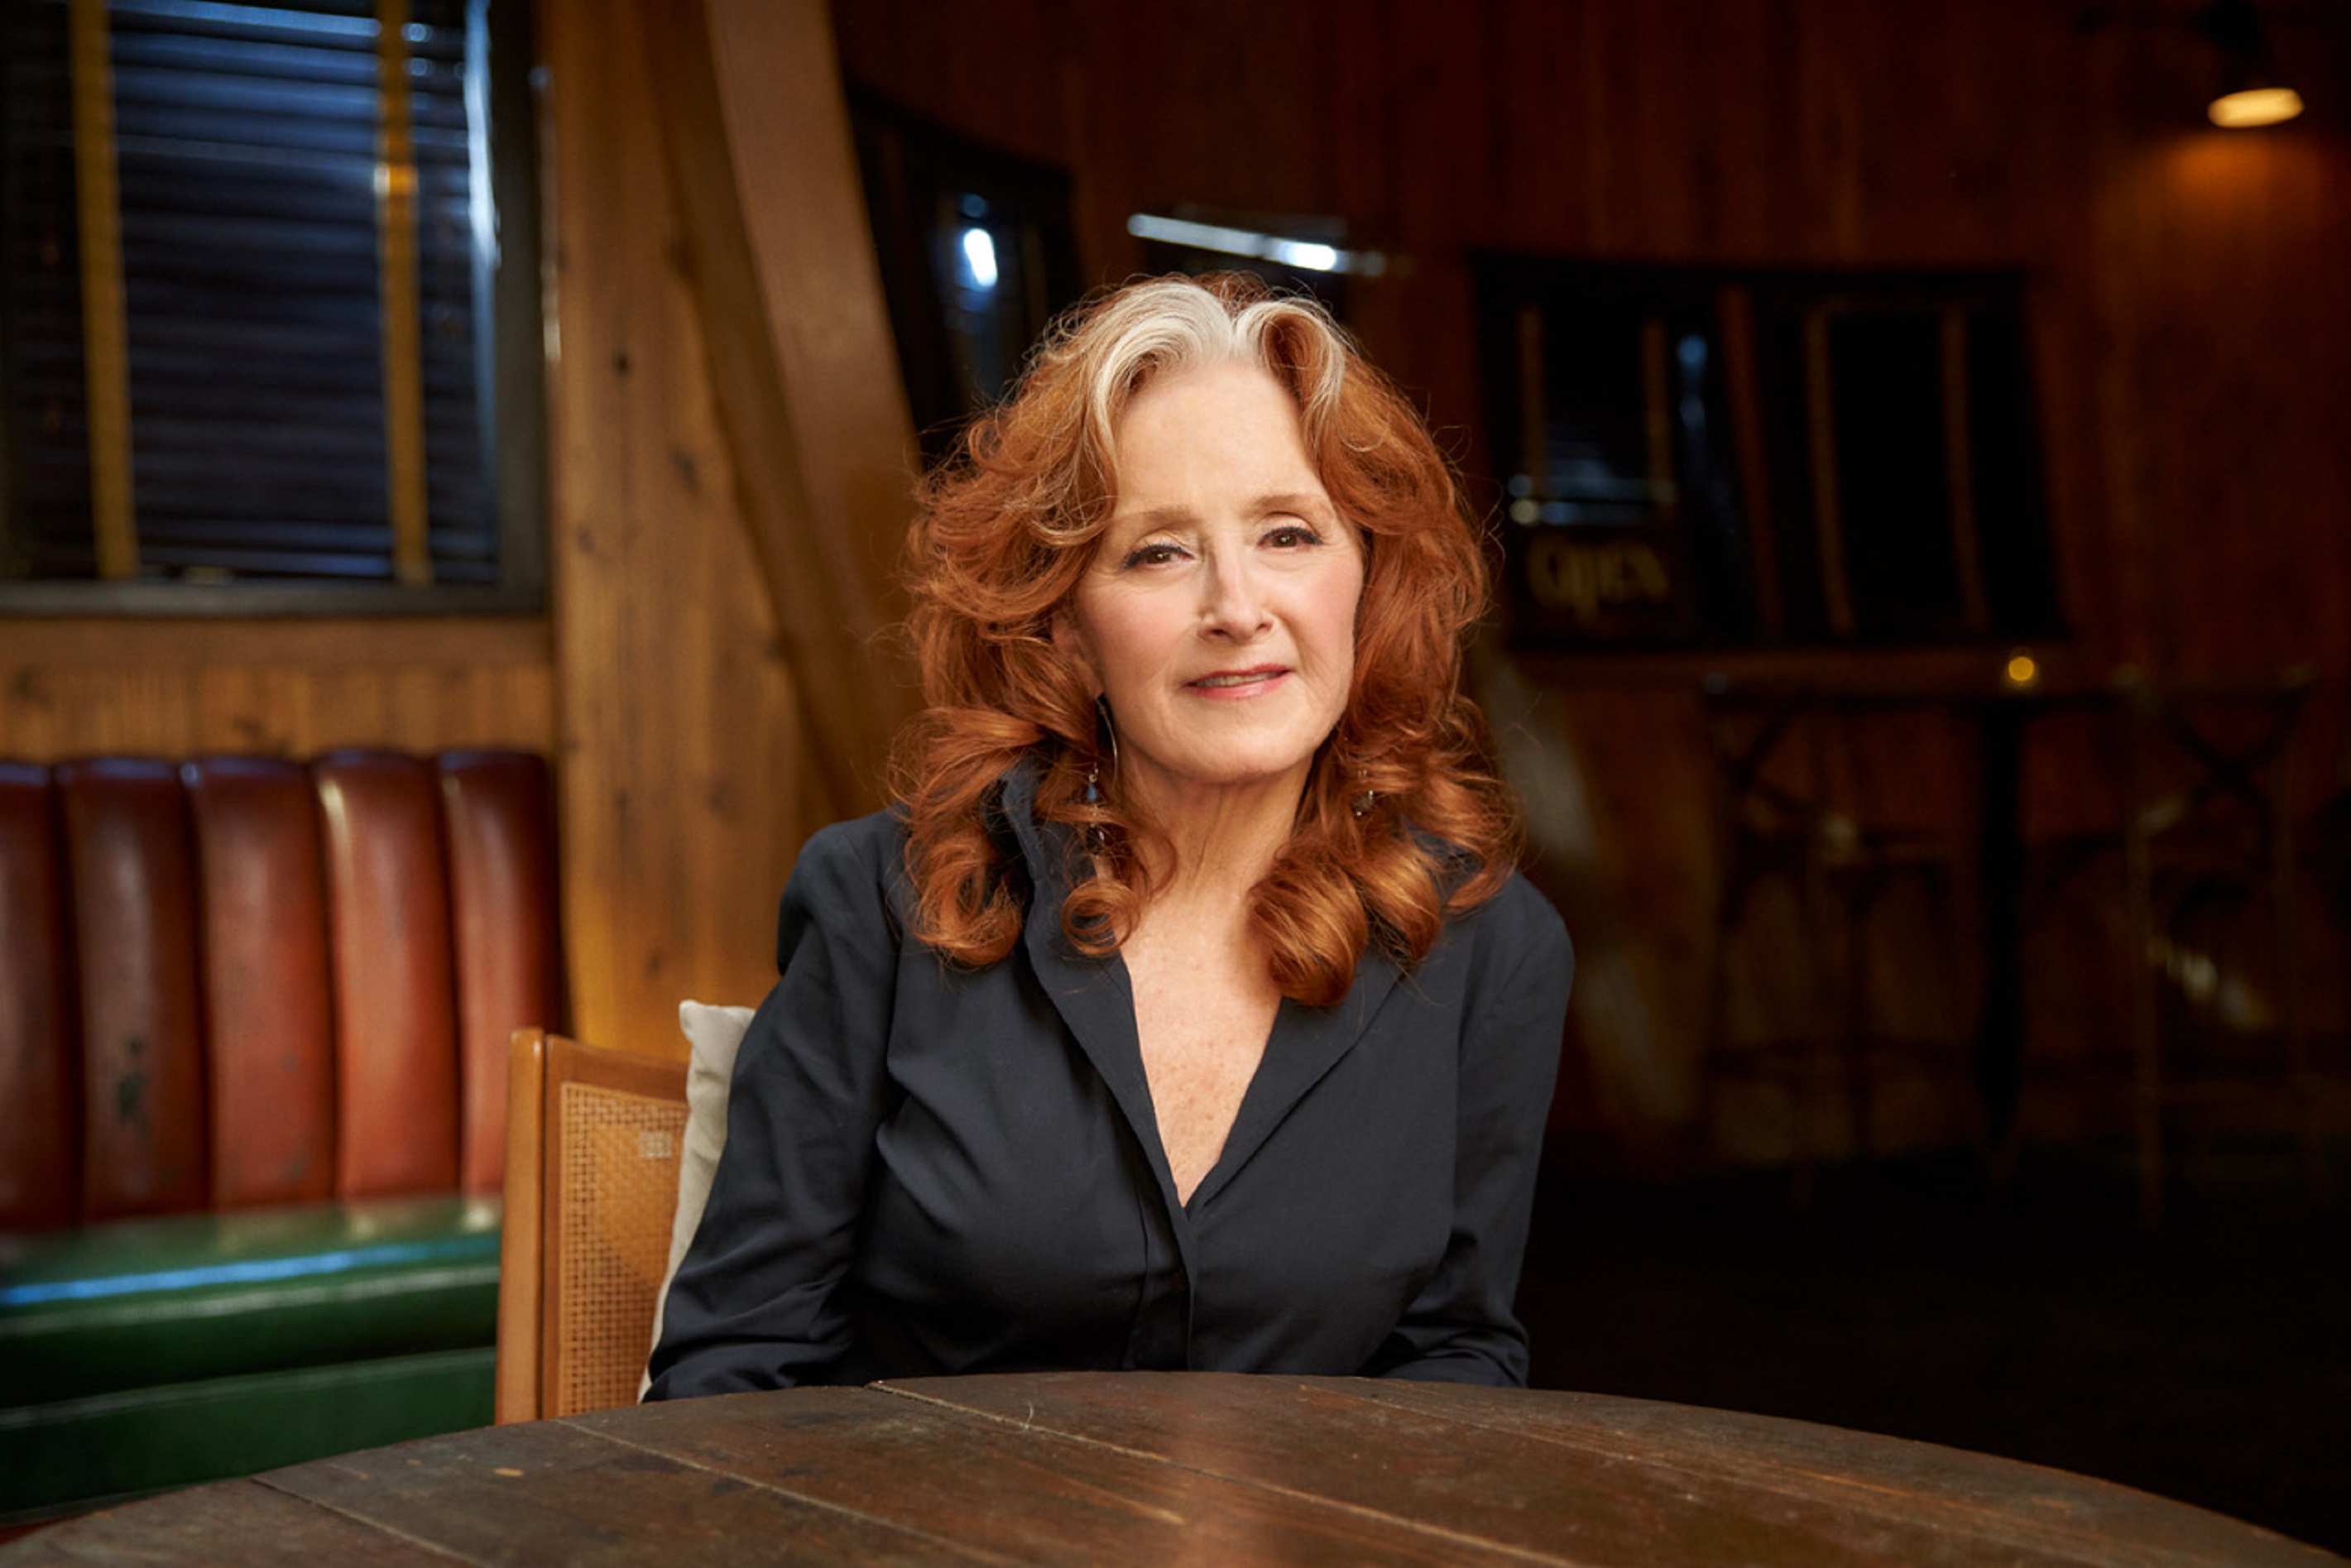 Bonnie Raitt Tells Apple Music About New Album 'Just Like That...', Musical Upbringing, What She Admires About The Current Generation of Female Artists, Time Spent with Prince, and More